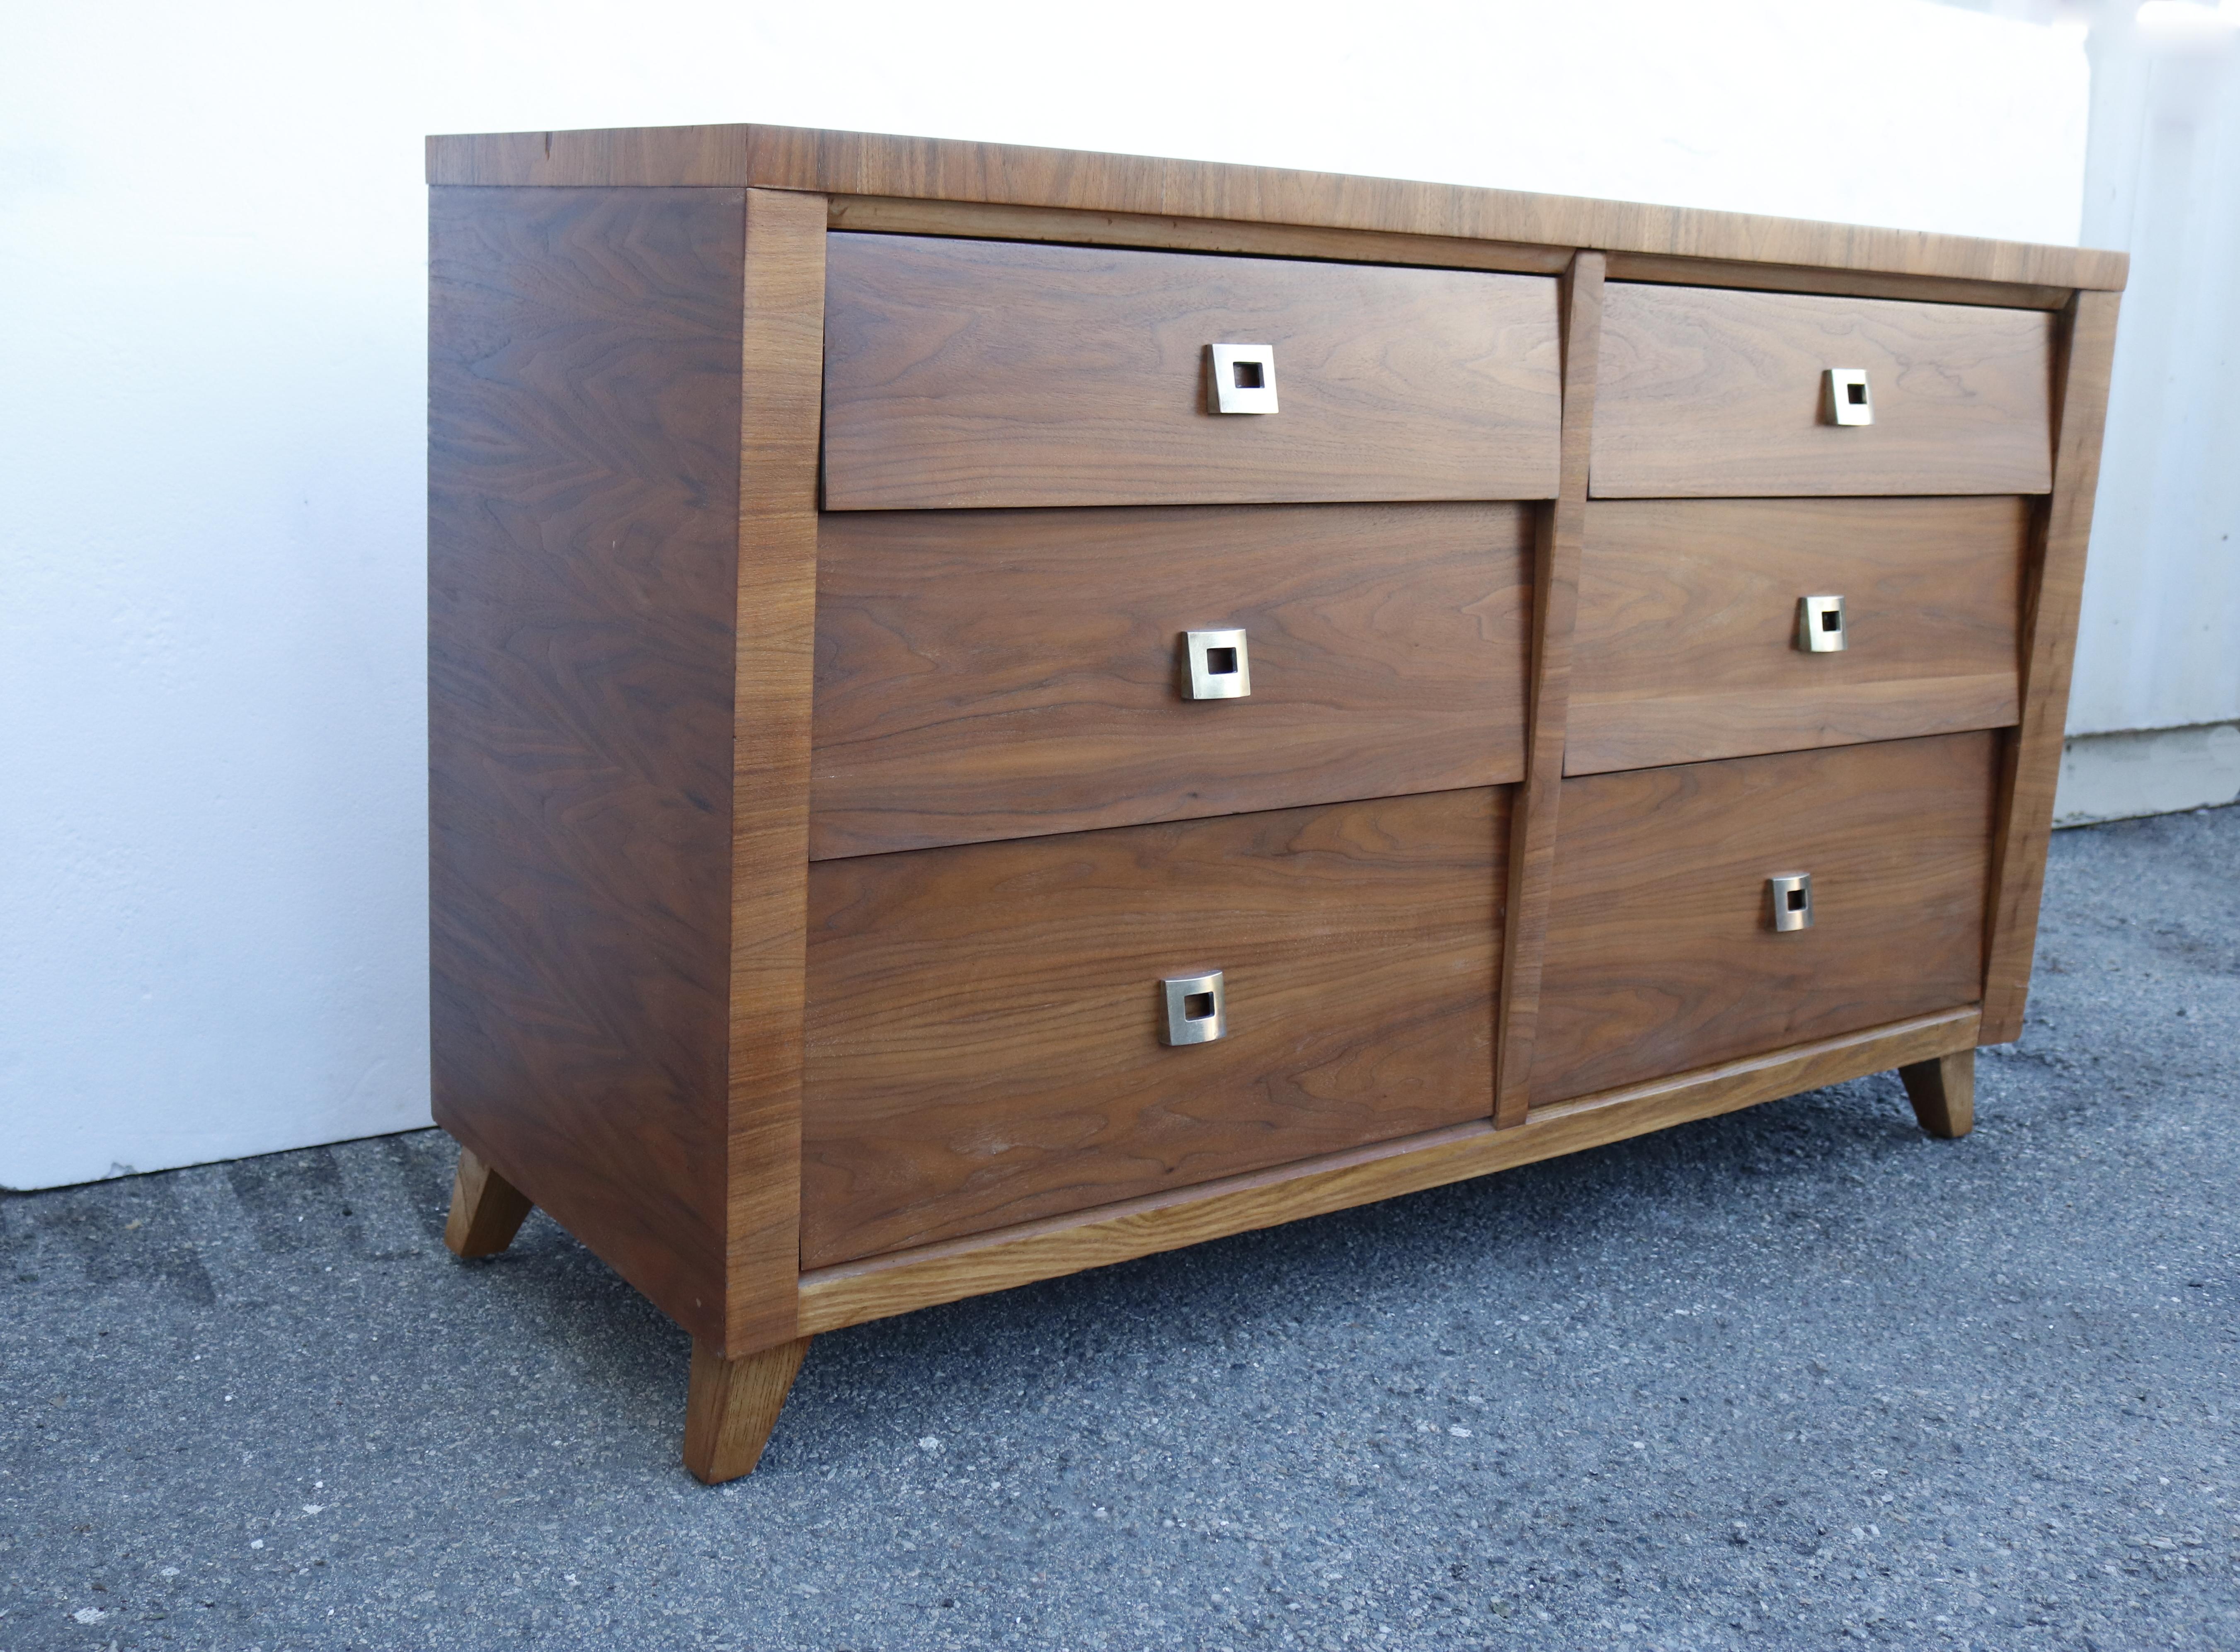 This chest features 6 comfortable drawers with brass hardware.
It is made of walnut and the right bottom drawer of cedar to protect your cashmere against the moths.
It retains the Morris stamp.